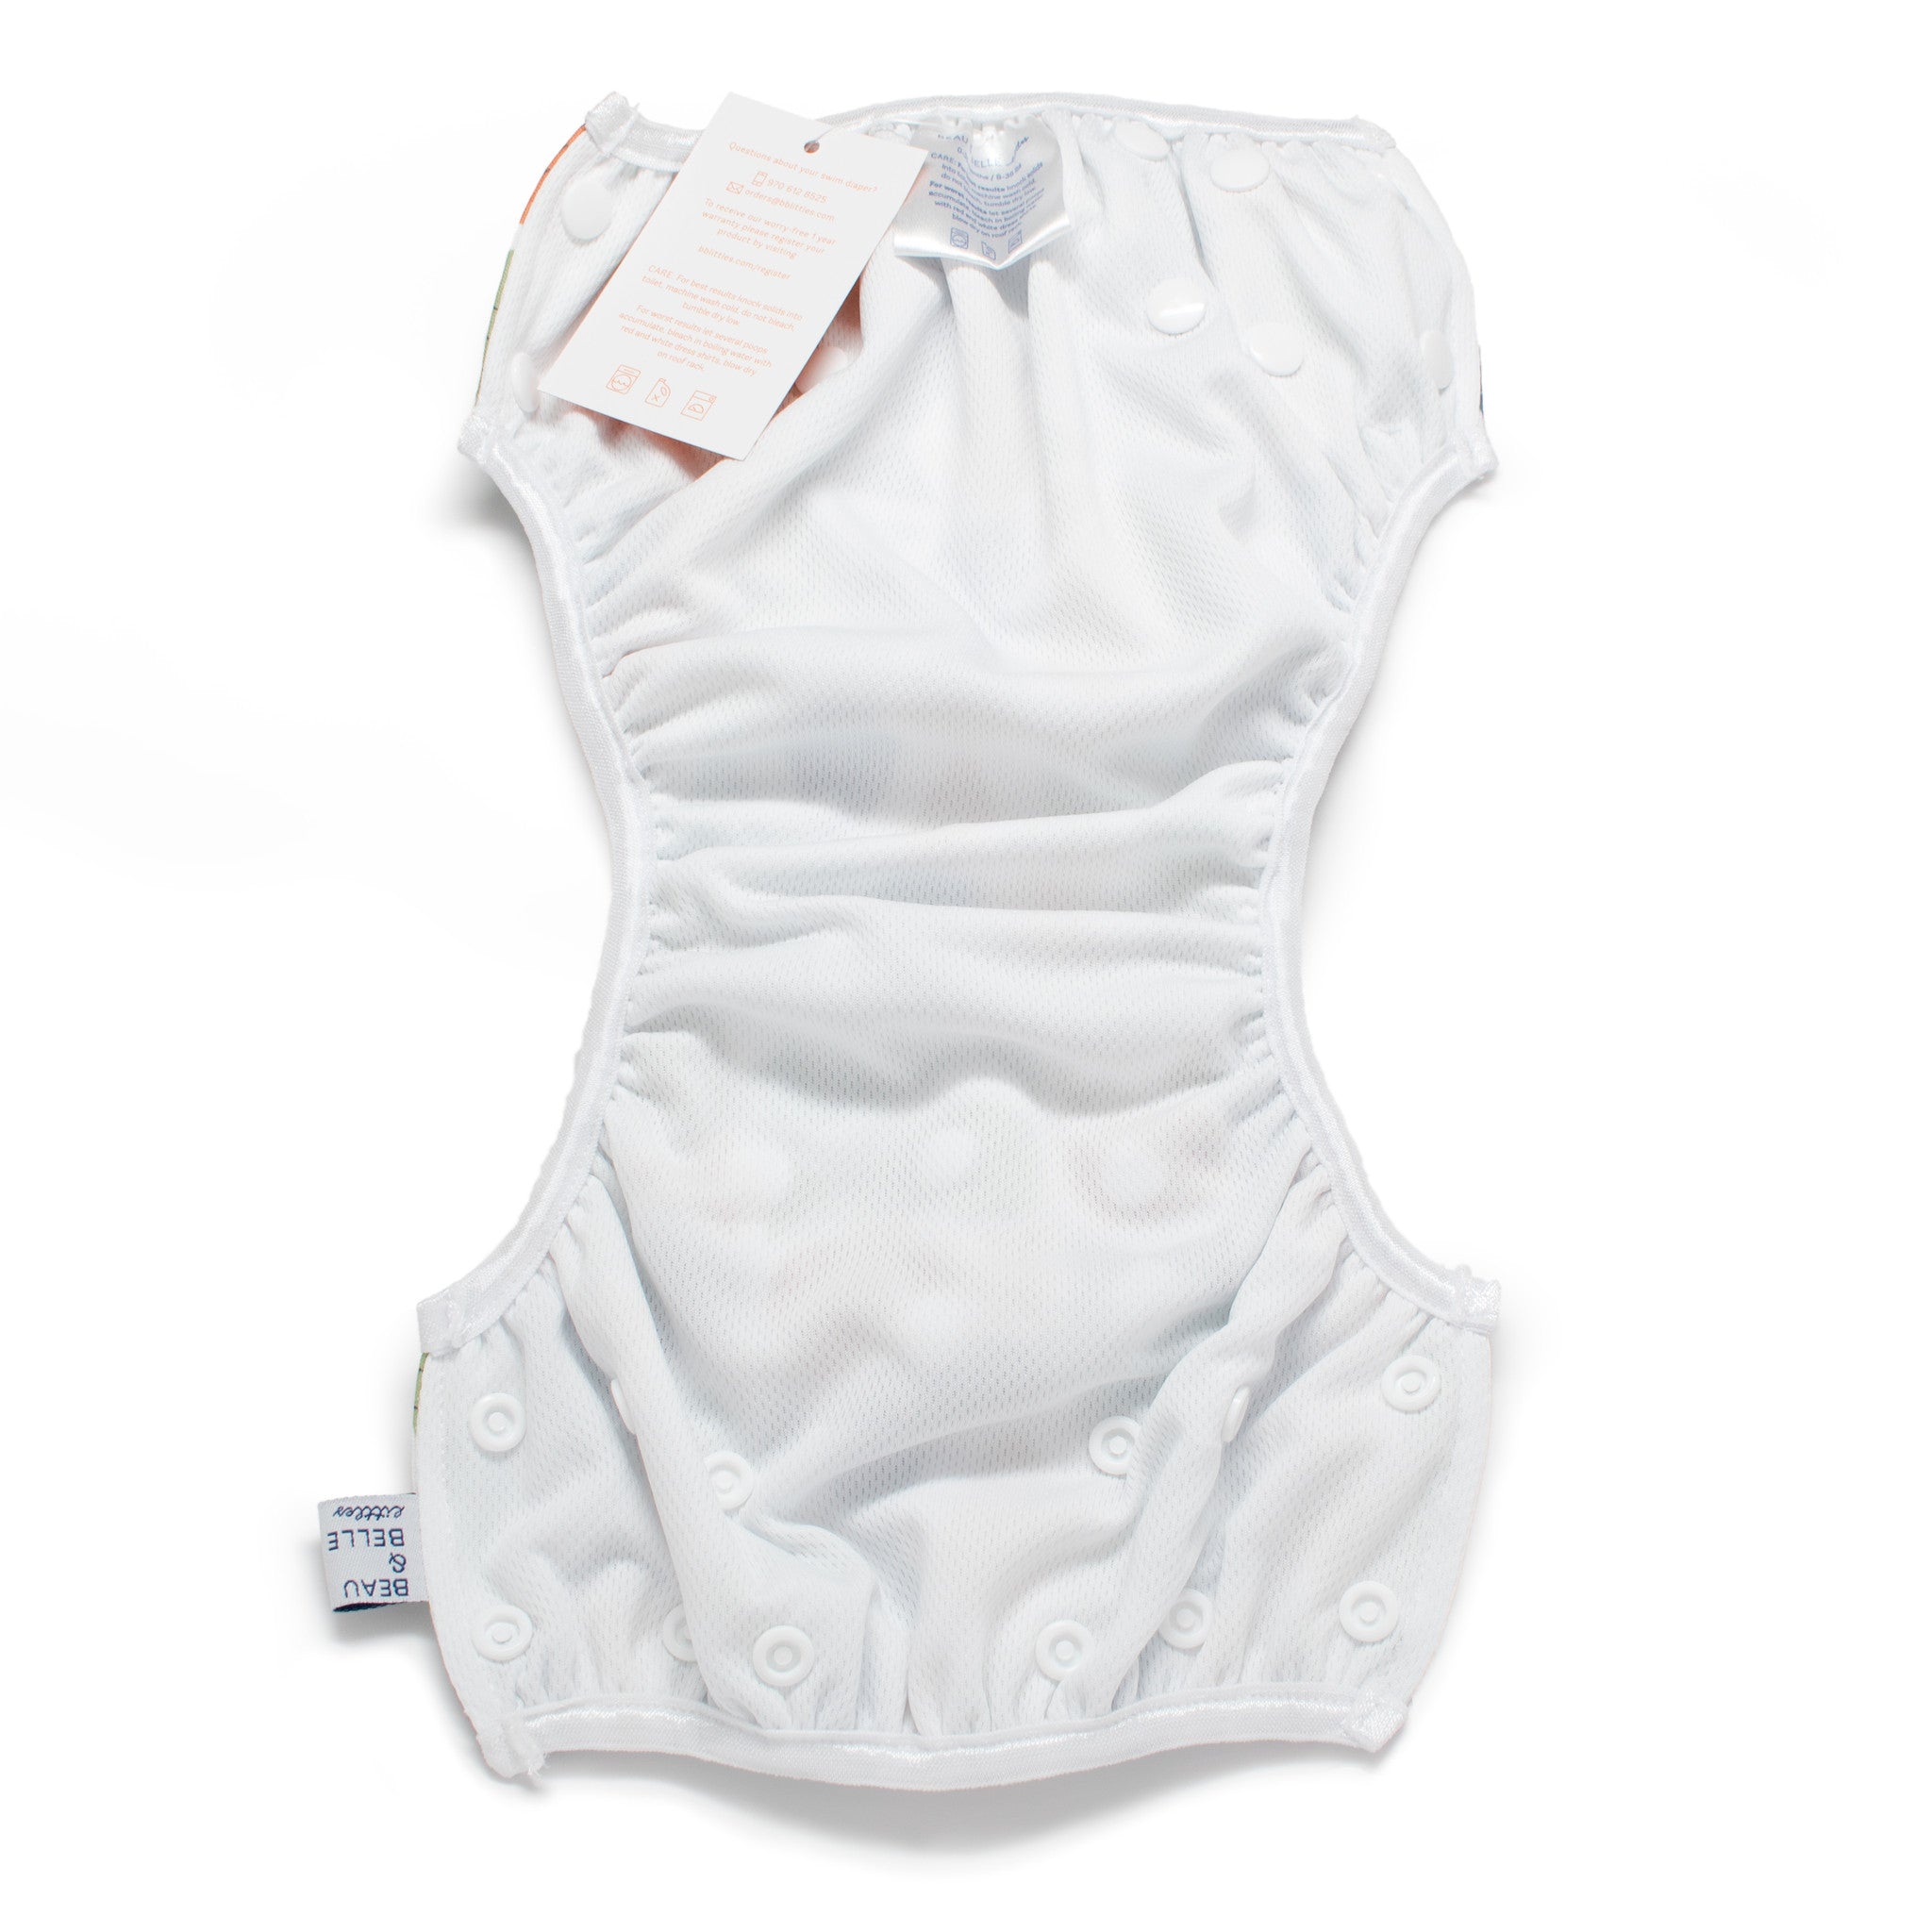 Beau and Belle Littles Swim Diaper, Regular Size, fish print, unbuttoned and laid flat to show the inner lining